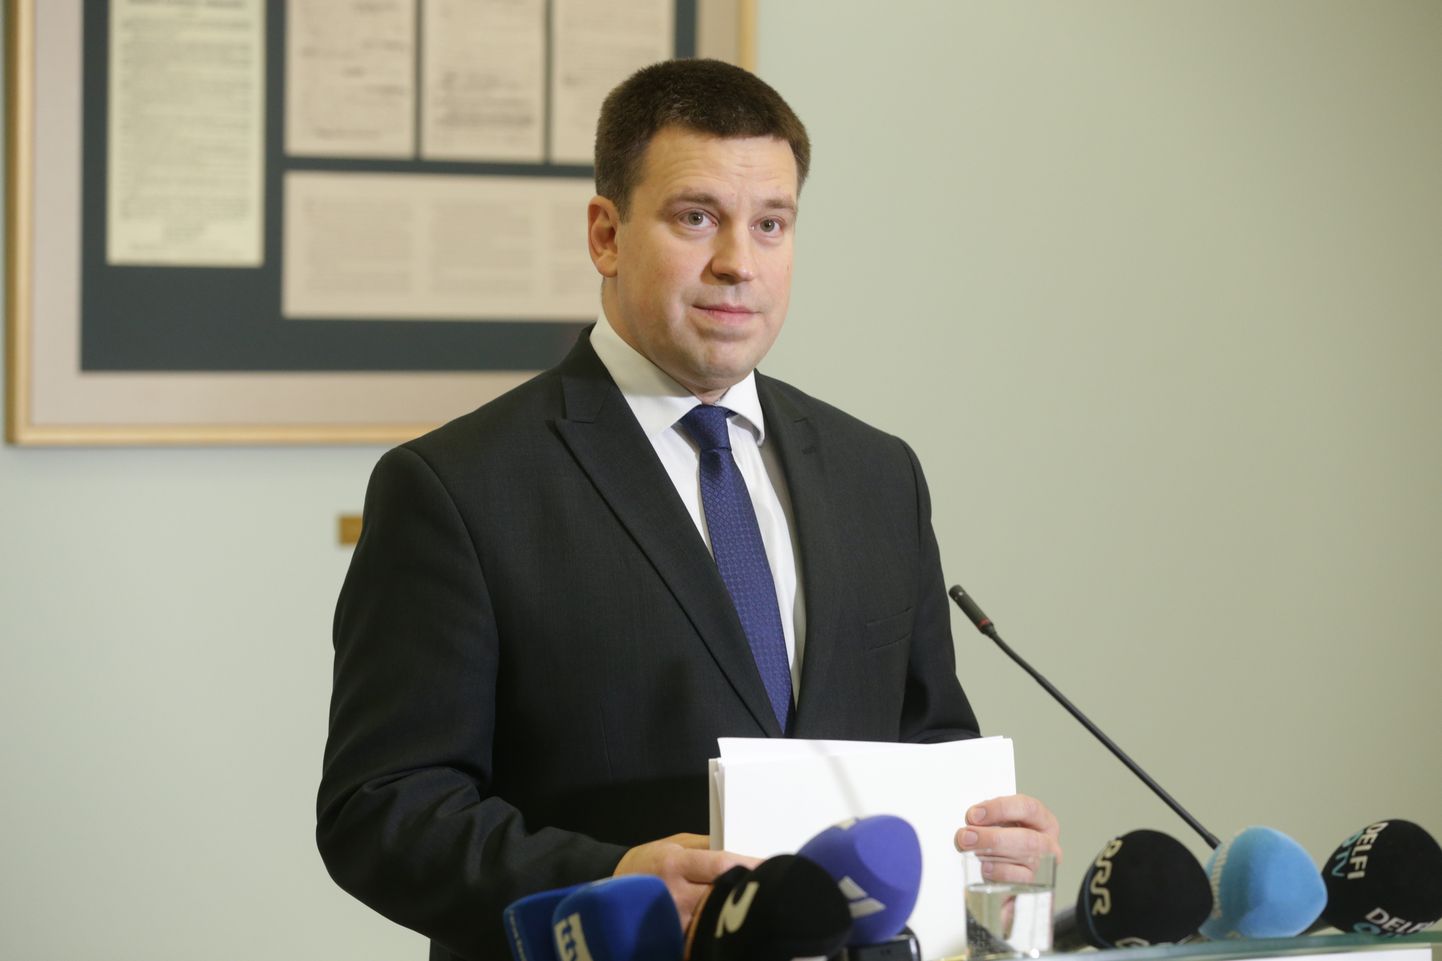 Prime Minister Juri Ratas said on Monday that he and leaders of coalition partners made a consensual proposal to release Minister of Rural Affairs Mart Jarvik from office.